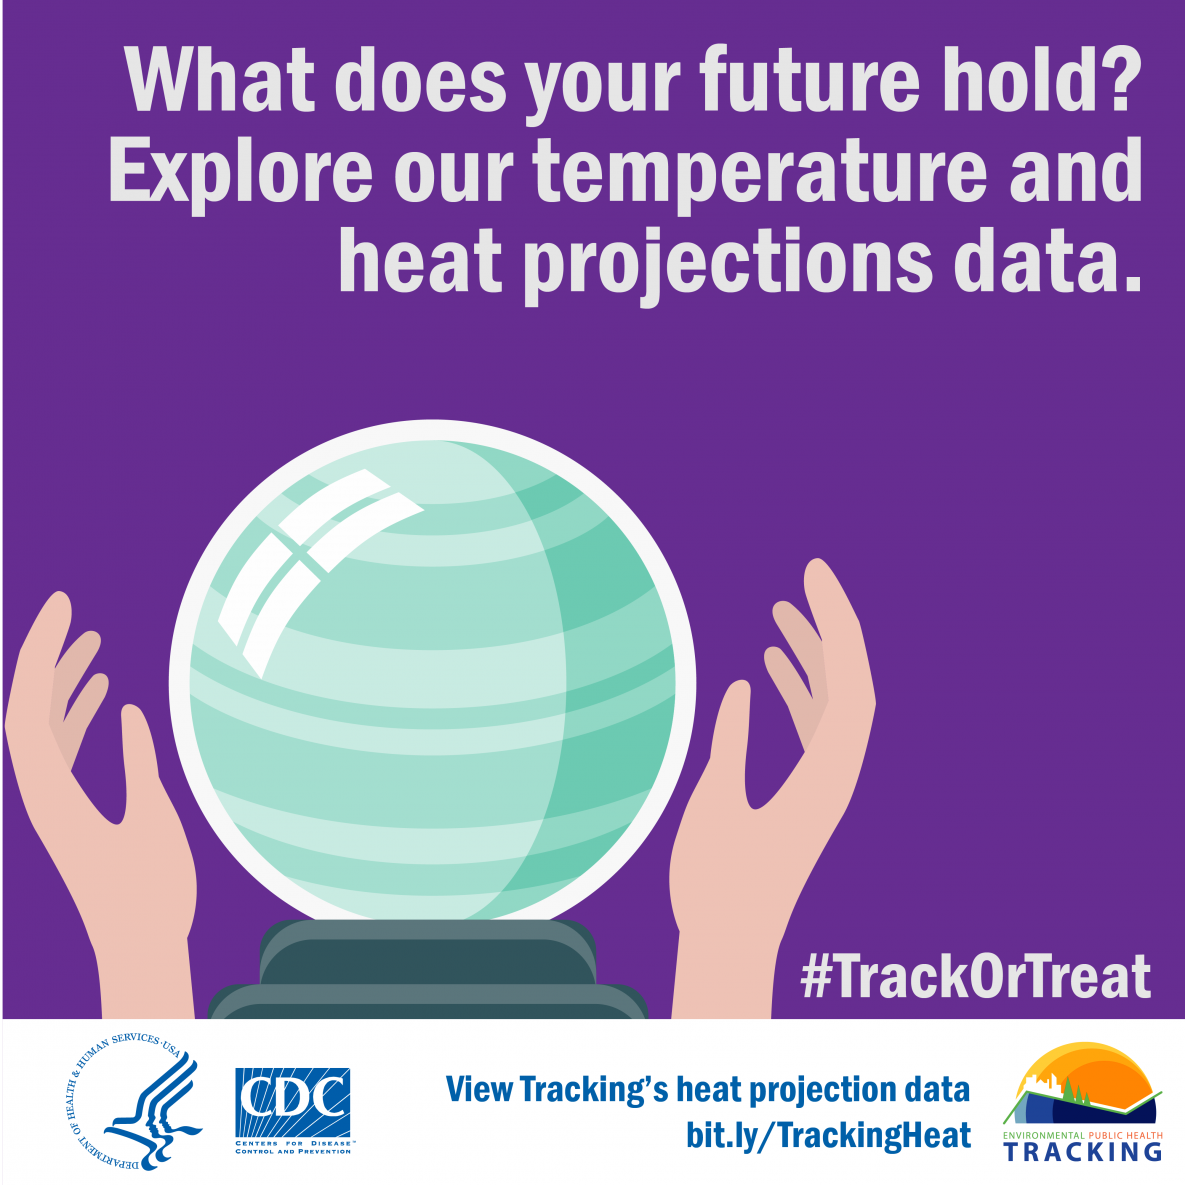 Crystal ball graphic with text: "What does your future hold? Explore our temperature and heat projections data."